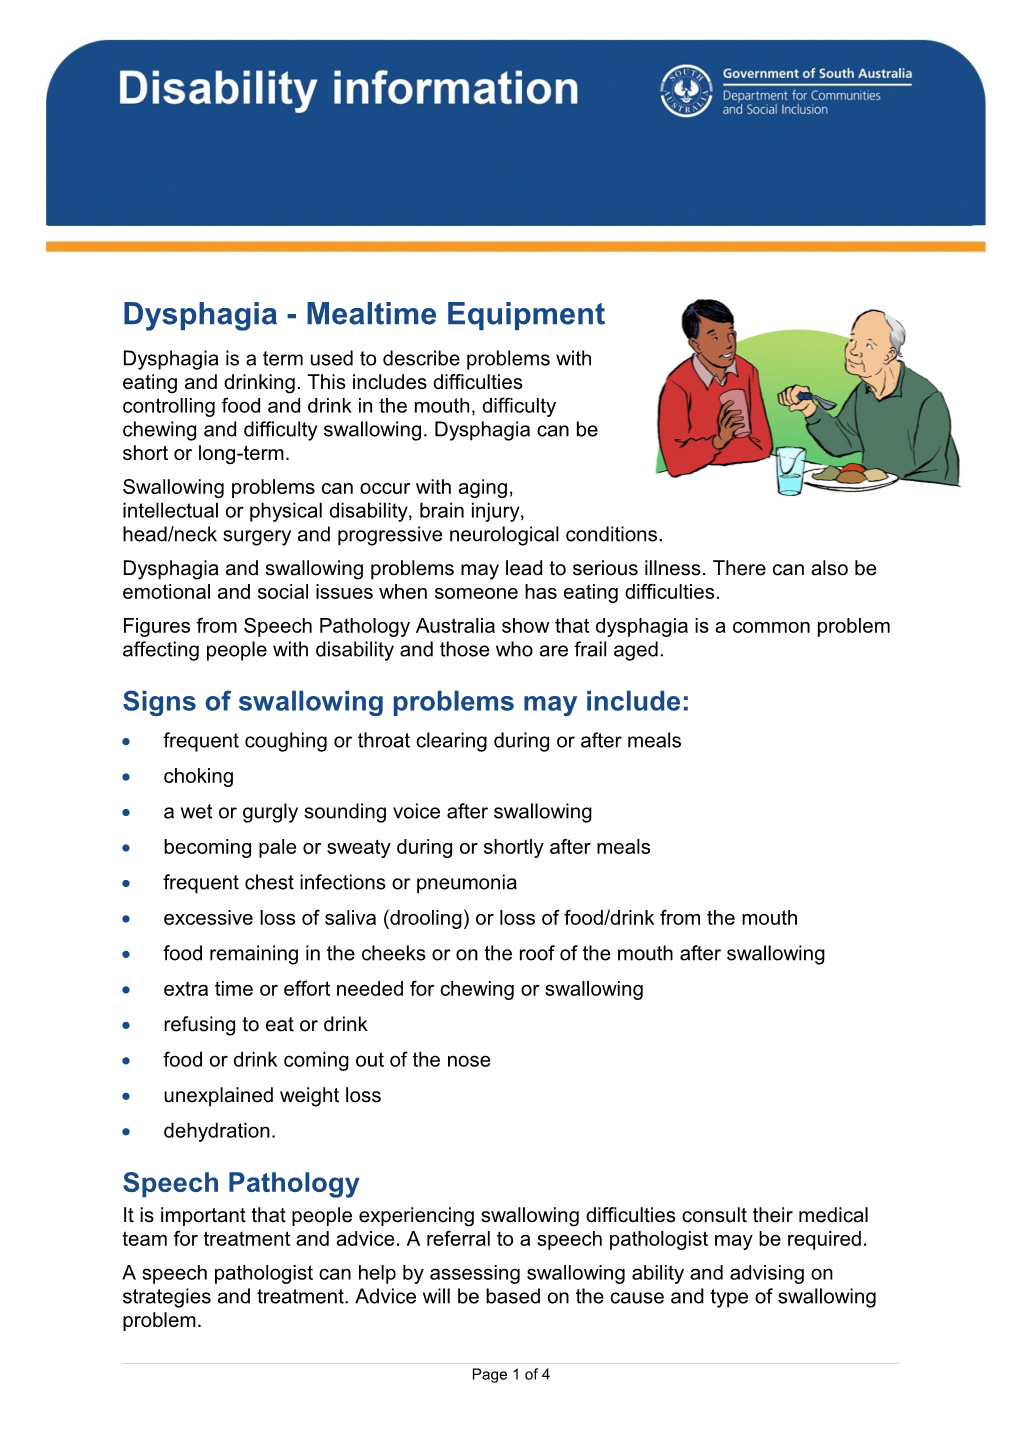 Dysphagia - Mealtime Equipment